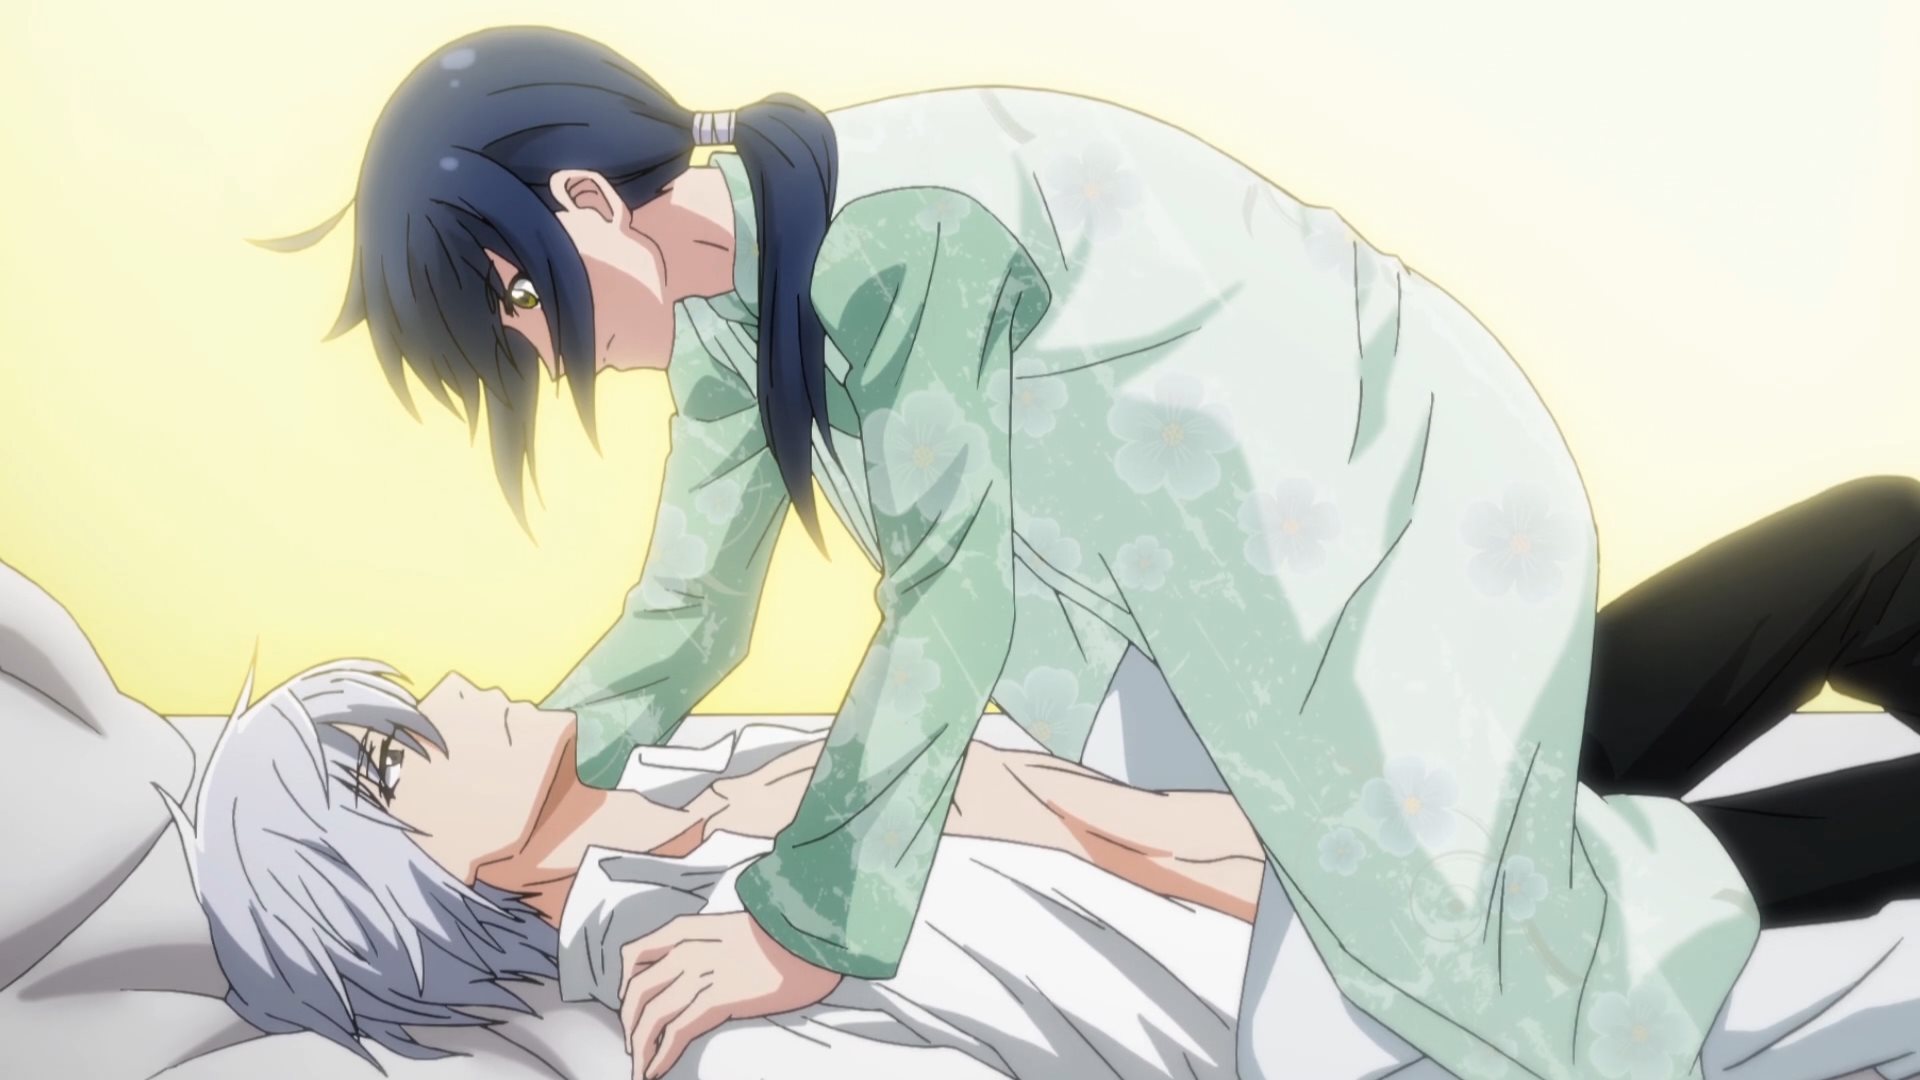 Rotten BL Reviews on X: NEW ANIME REVIEW: Spiritpact - Episode 1